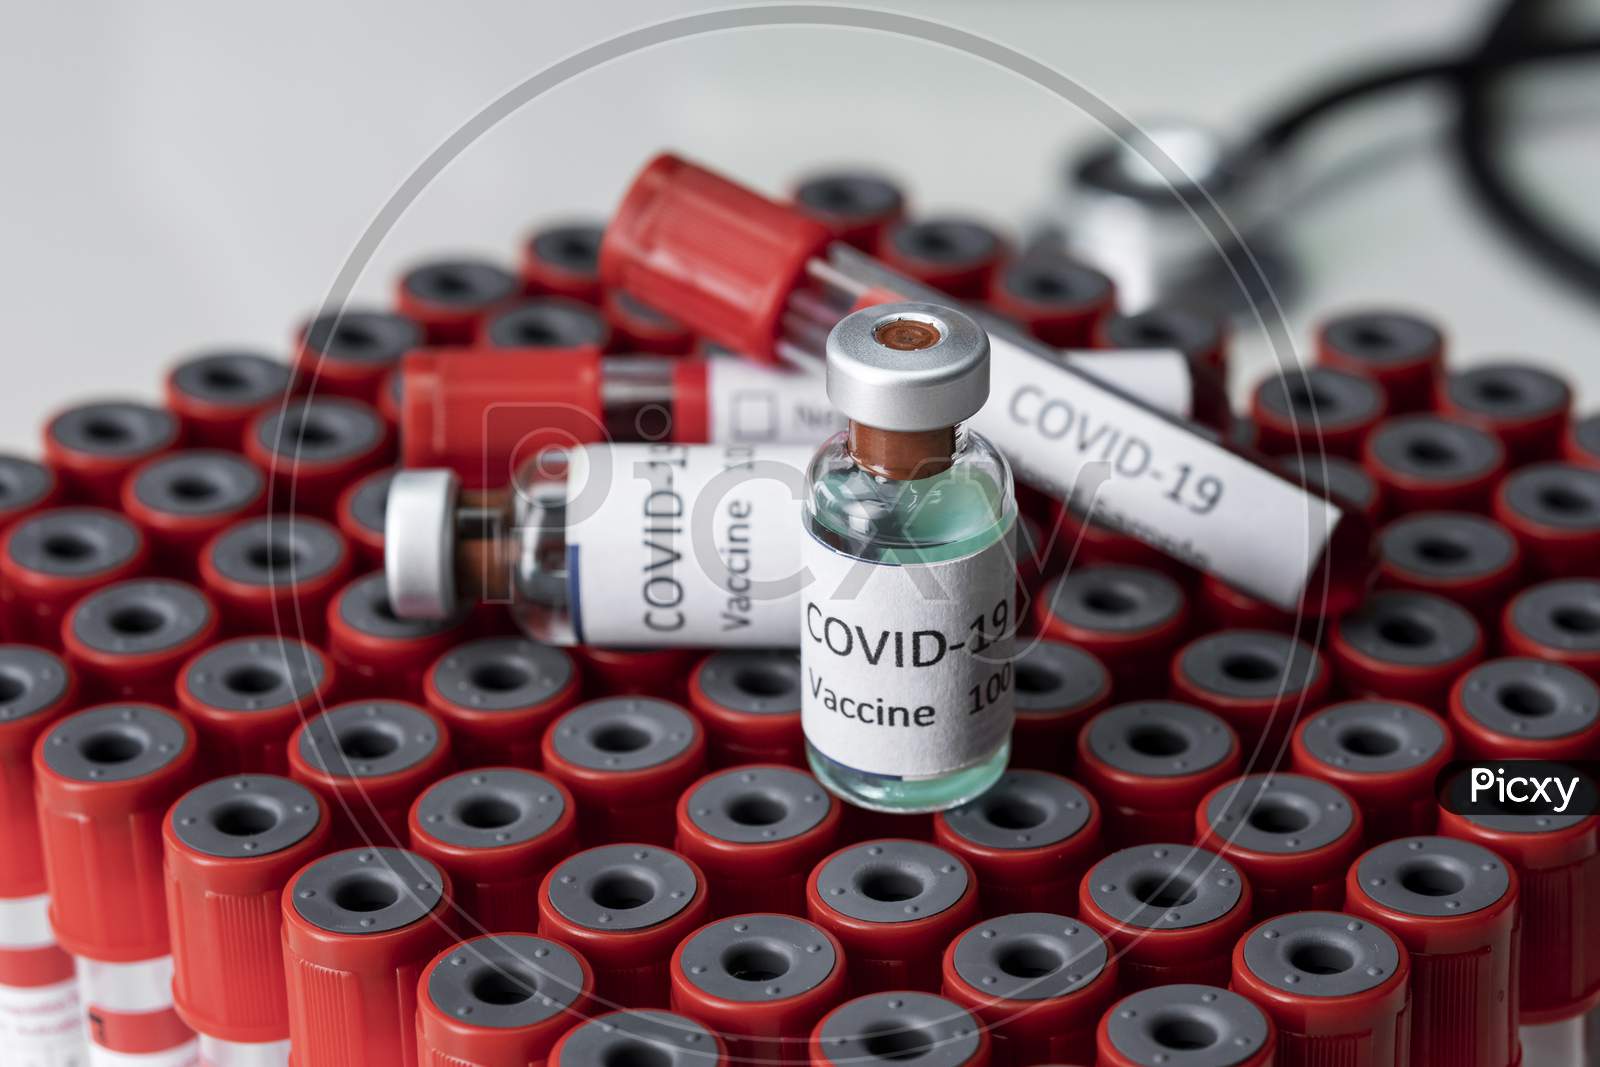 Nobel Coronavirus Covid-19 Vaccine Vial A Illustrative Picture, Doctor In The Laboratory With A Biological Tube For Analysis And Sampling Of Covid-19 Infectious Disea.